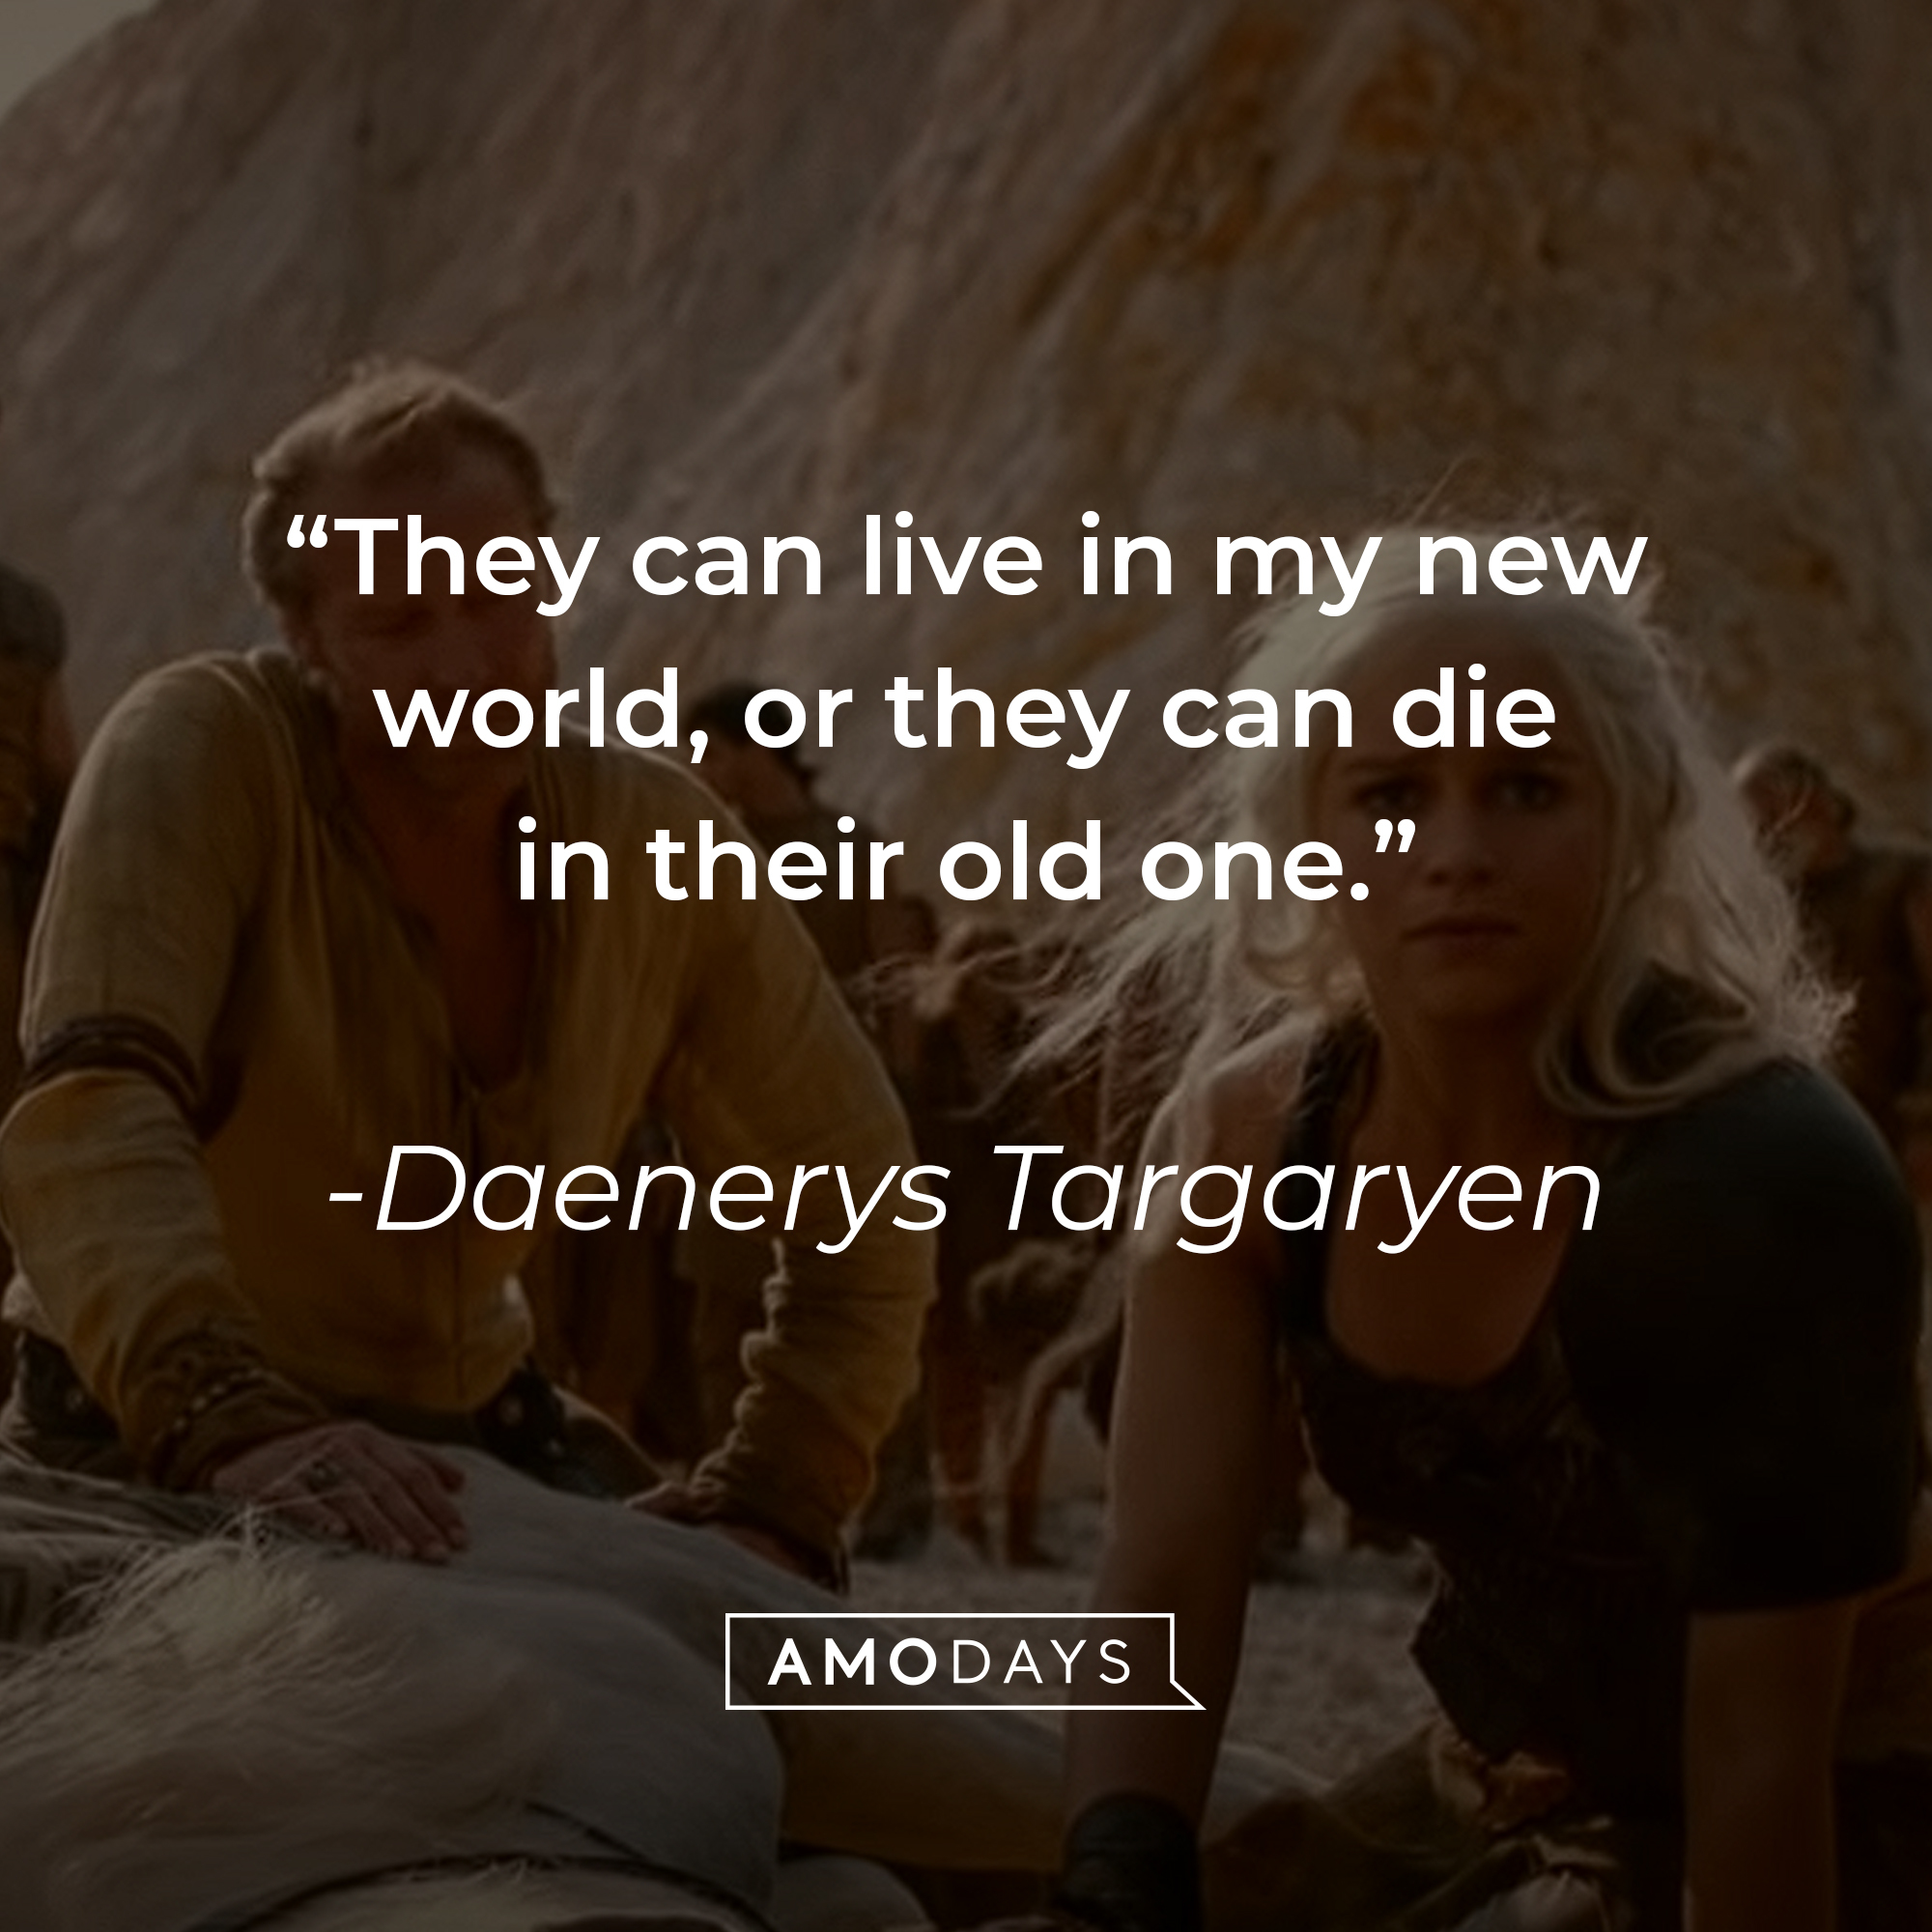 Daenerys Targaryen's quote: "They can live in my new world, or they can die in their old one." | Source: youtube.com/gameofthrones